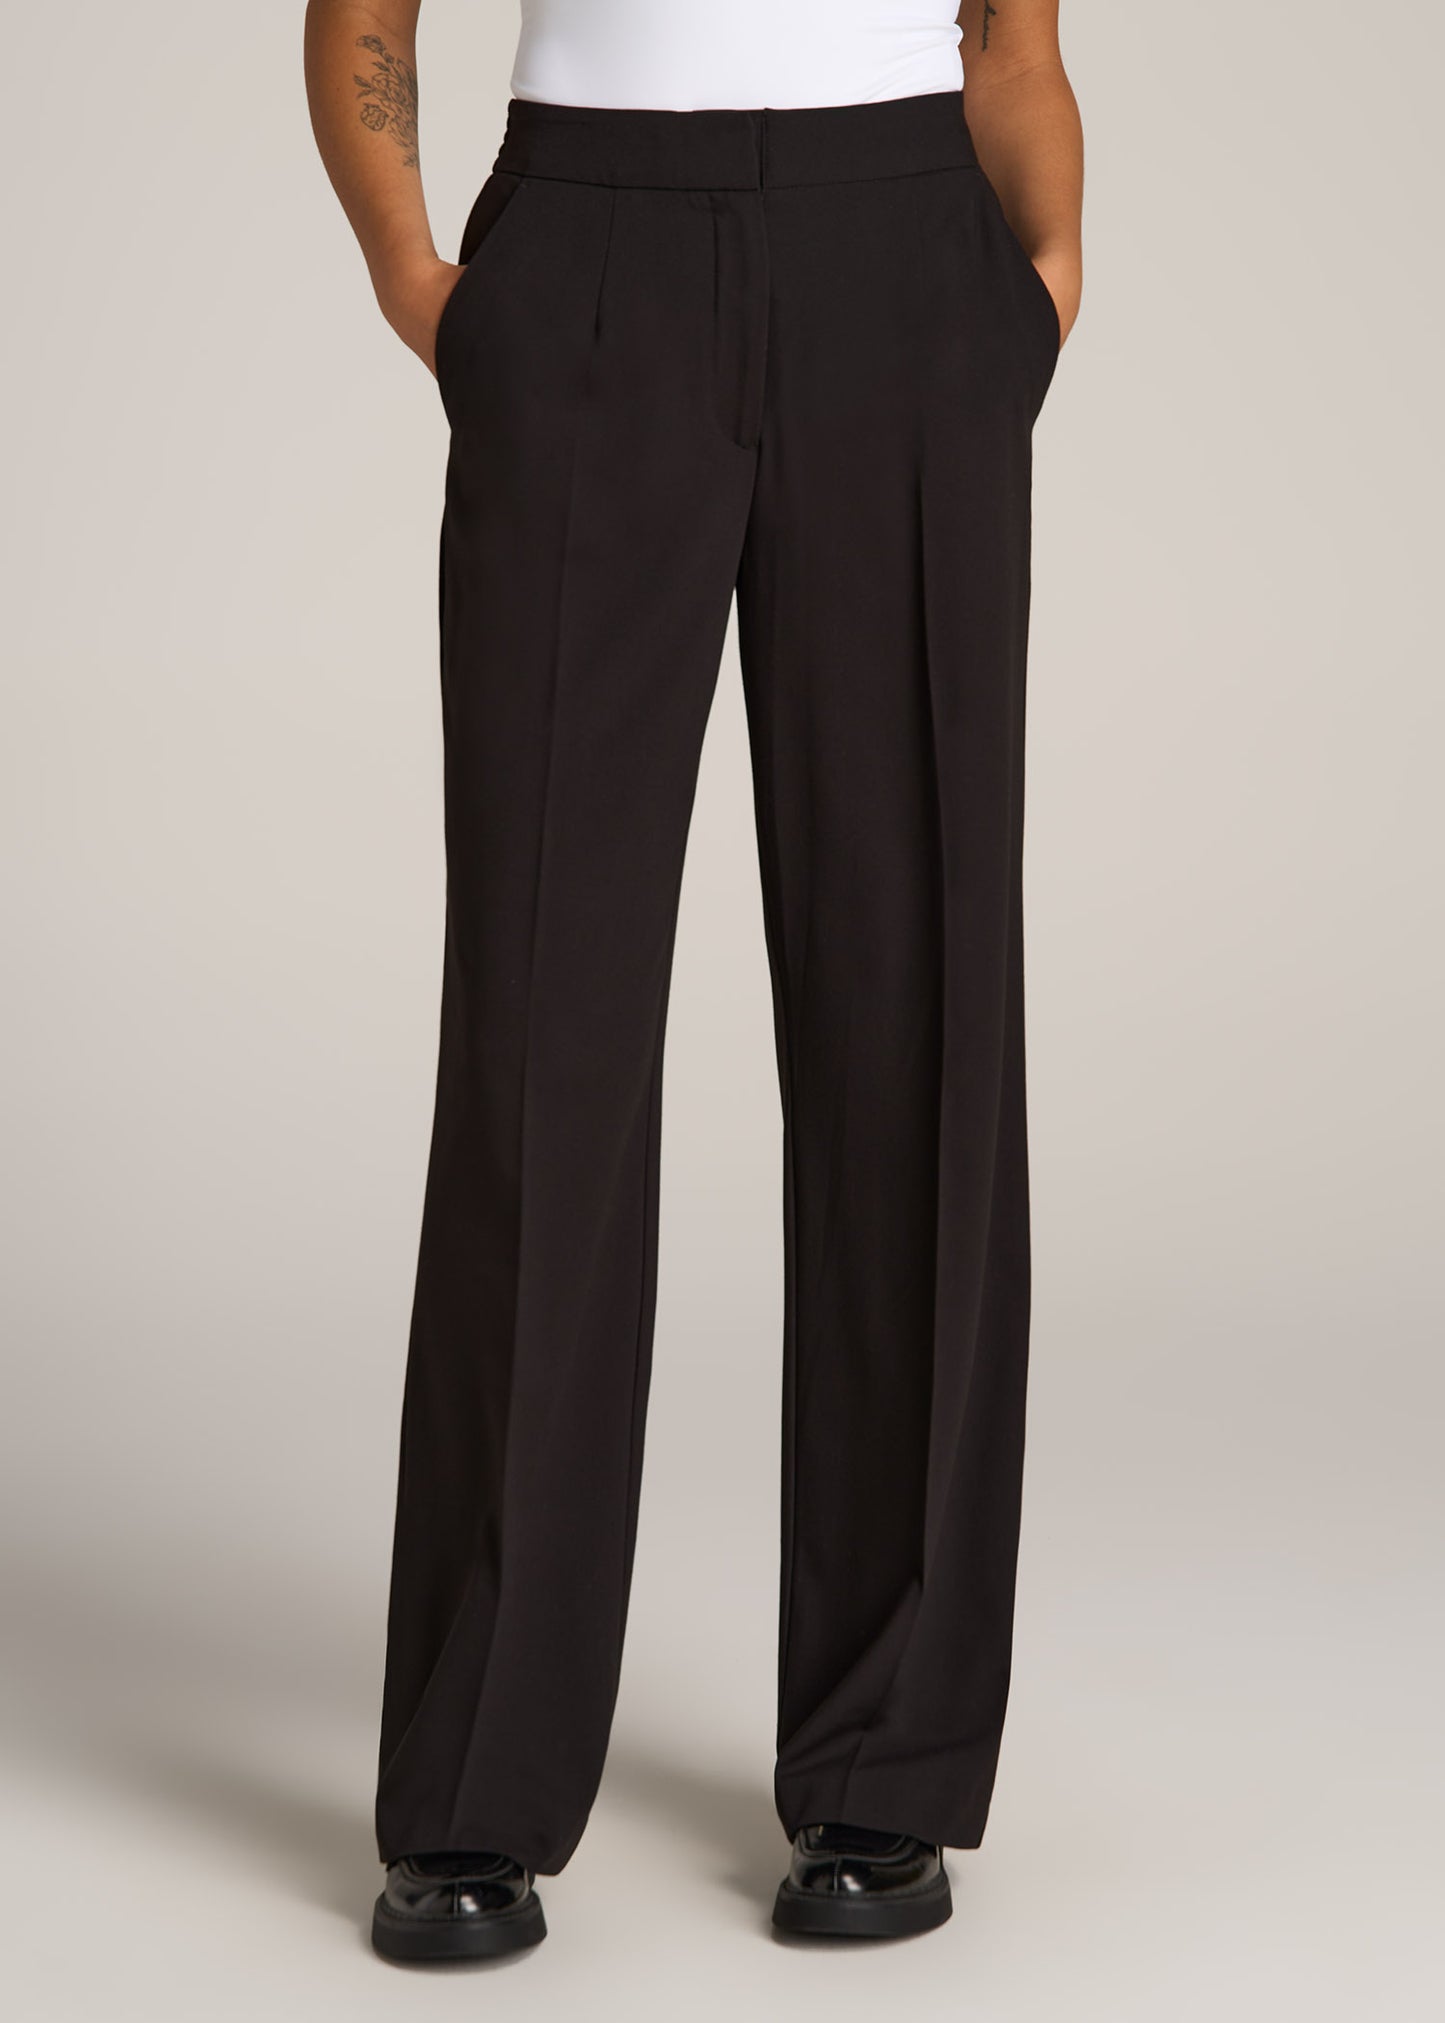 Tall Flared Trousers, Women's Bootcut Trousers